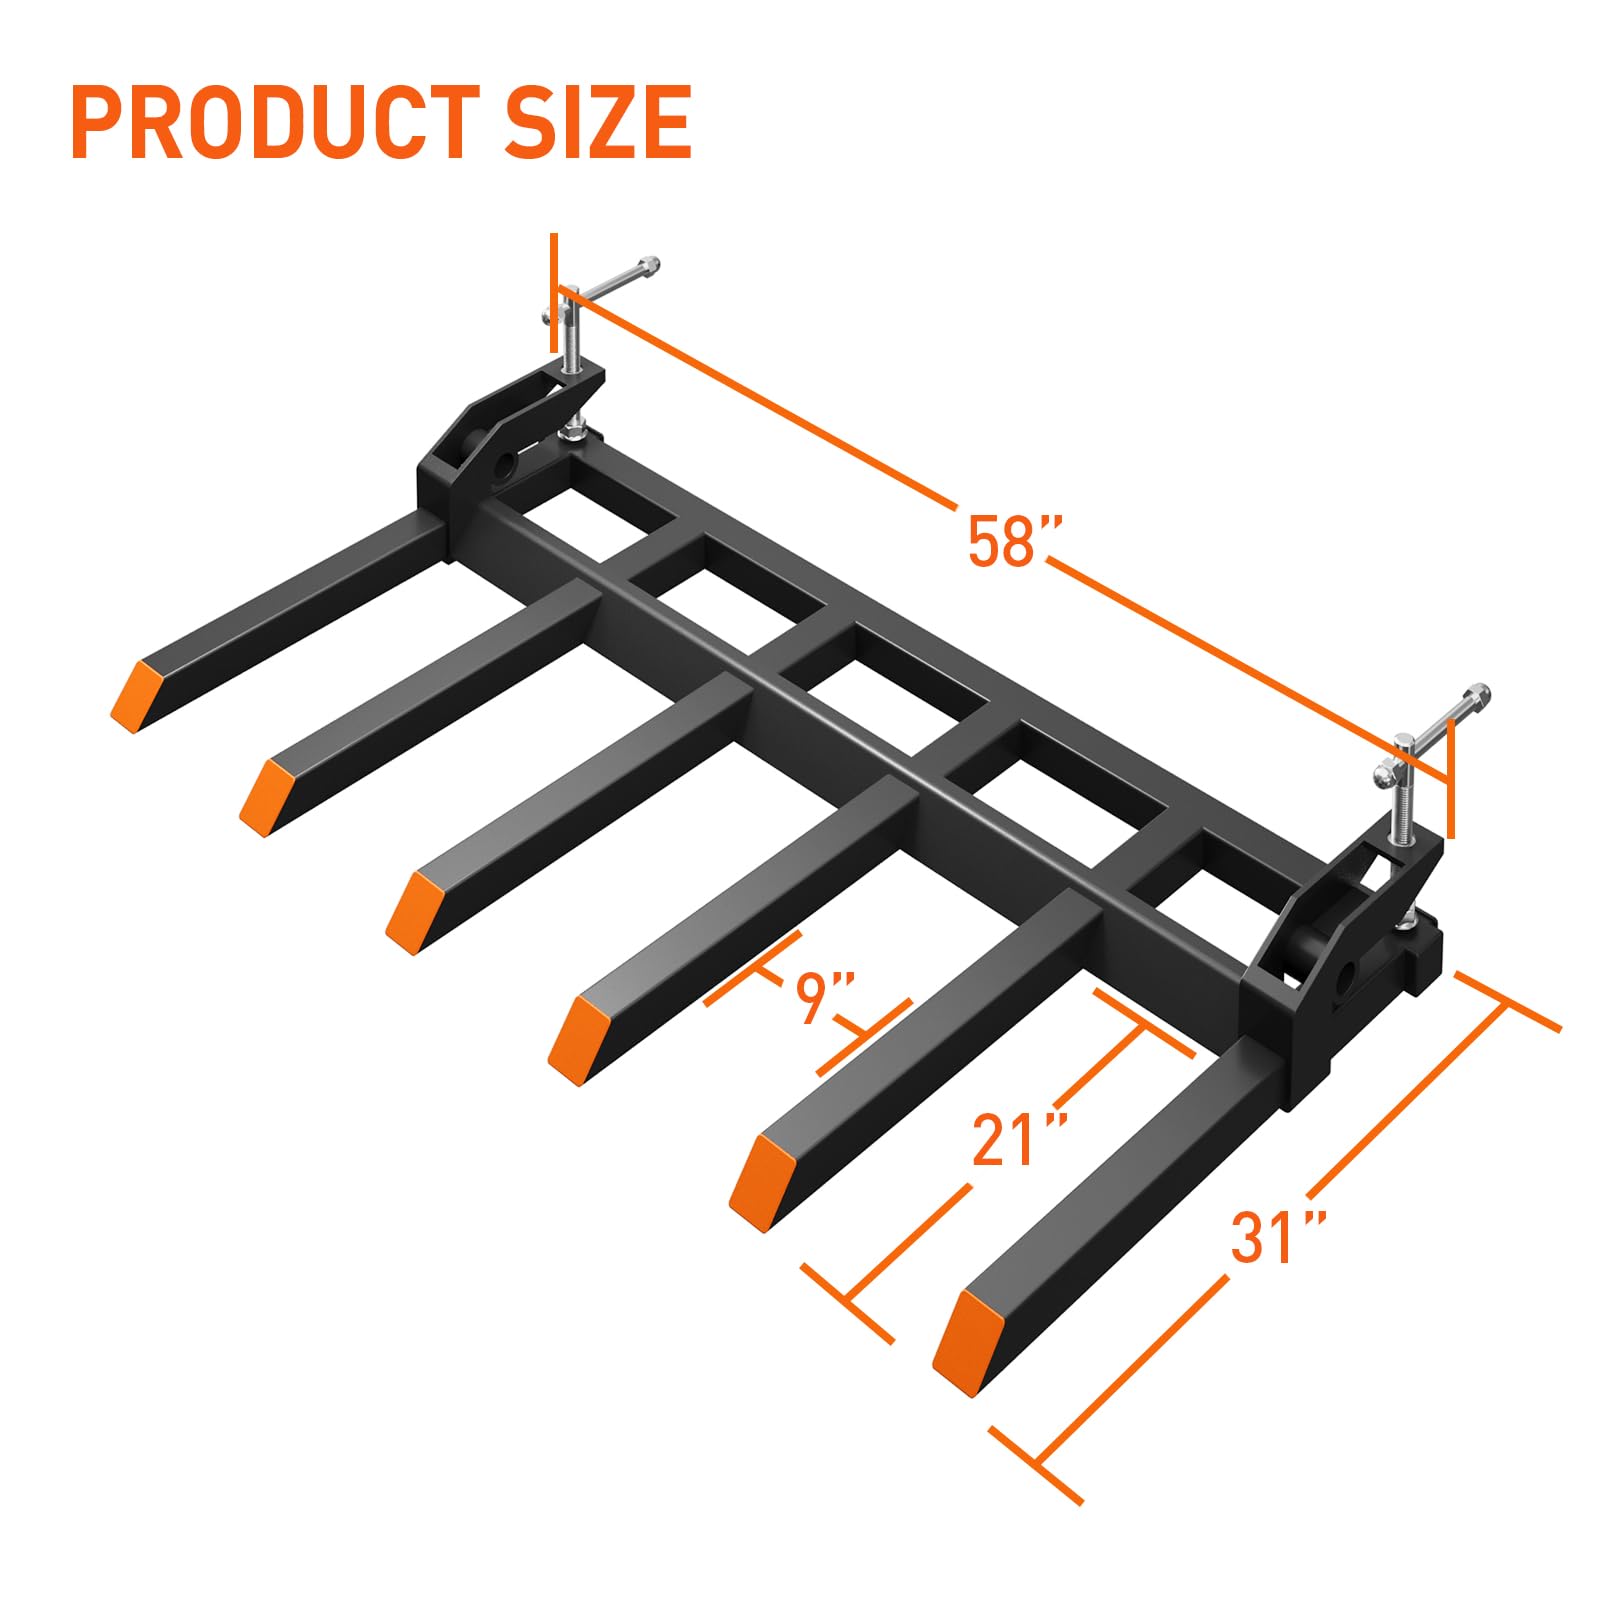 60" Clamp-On Debris Forks for Tractor Bucket, Heavy Duty